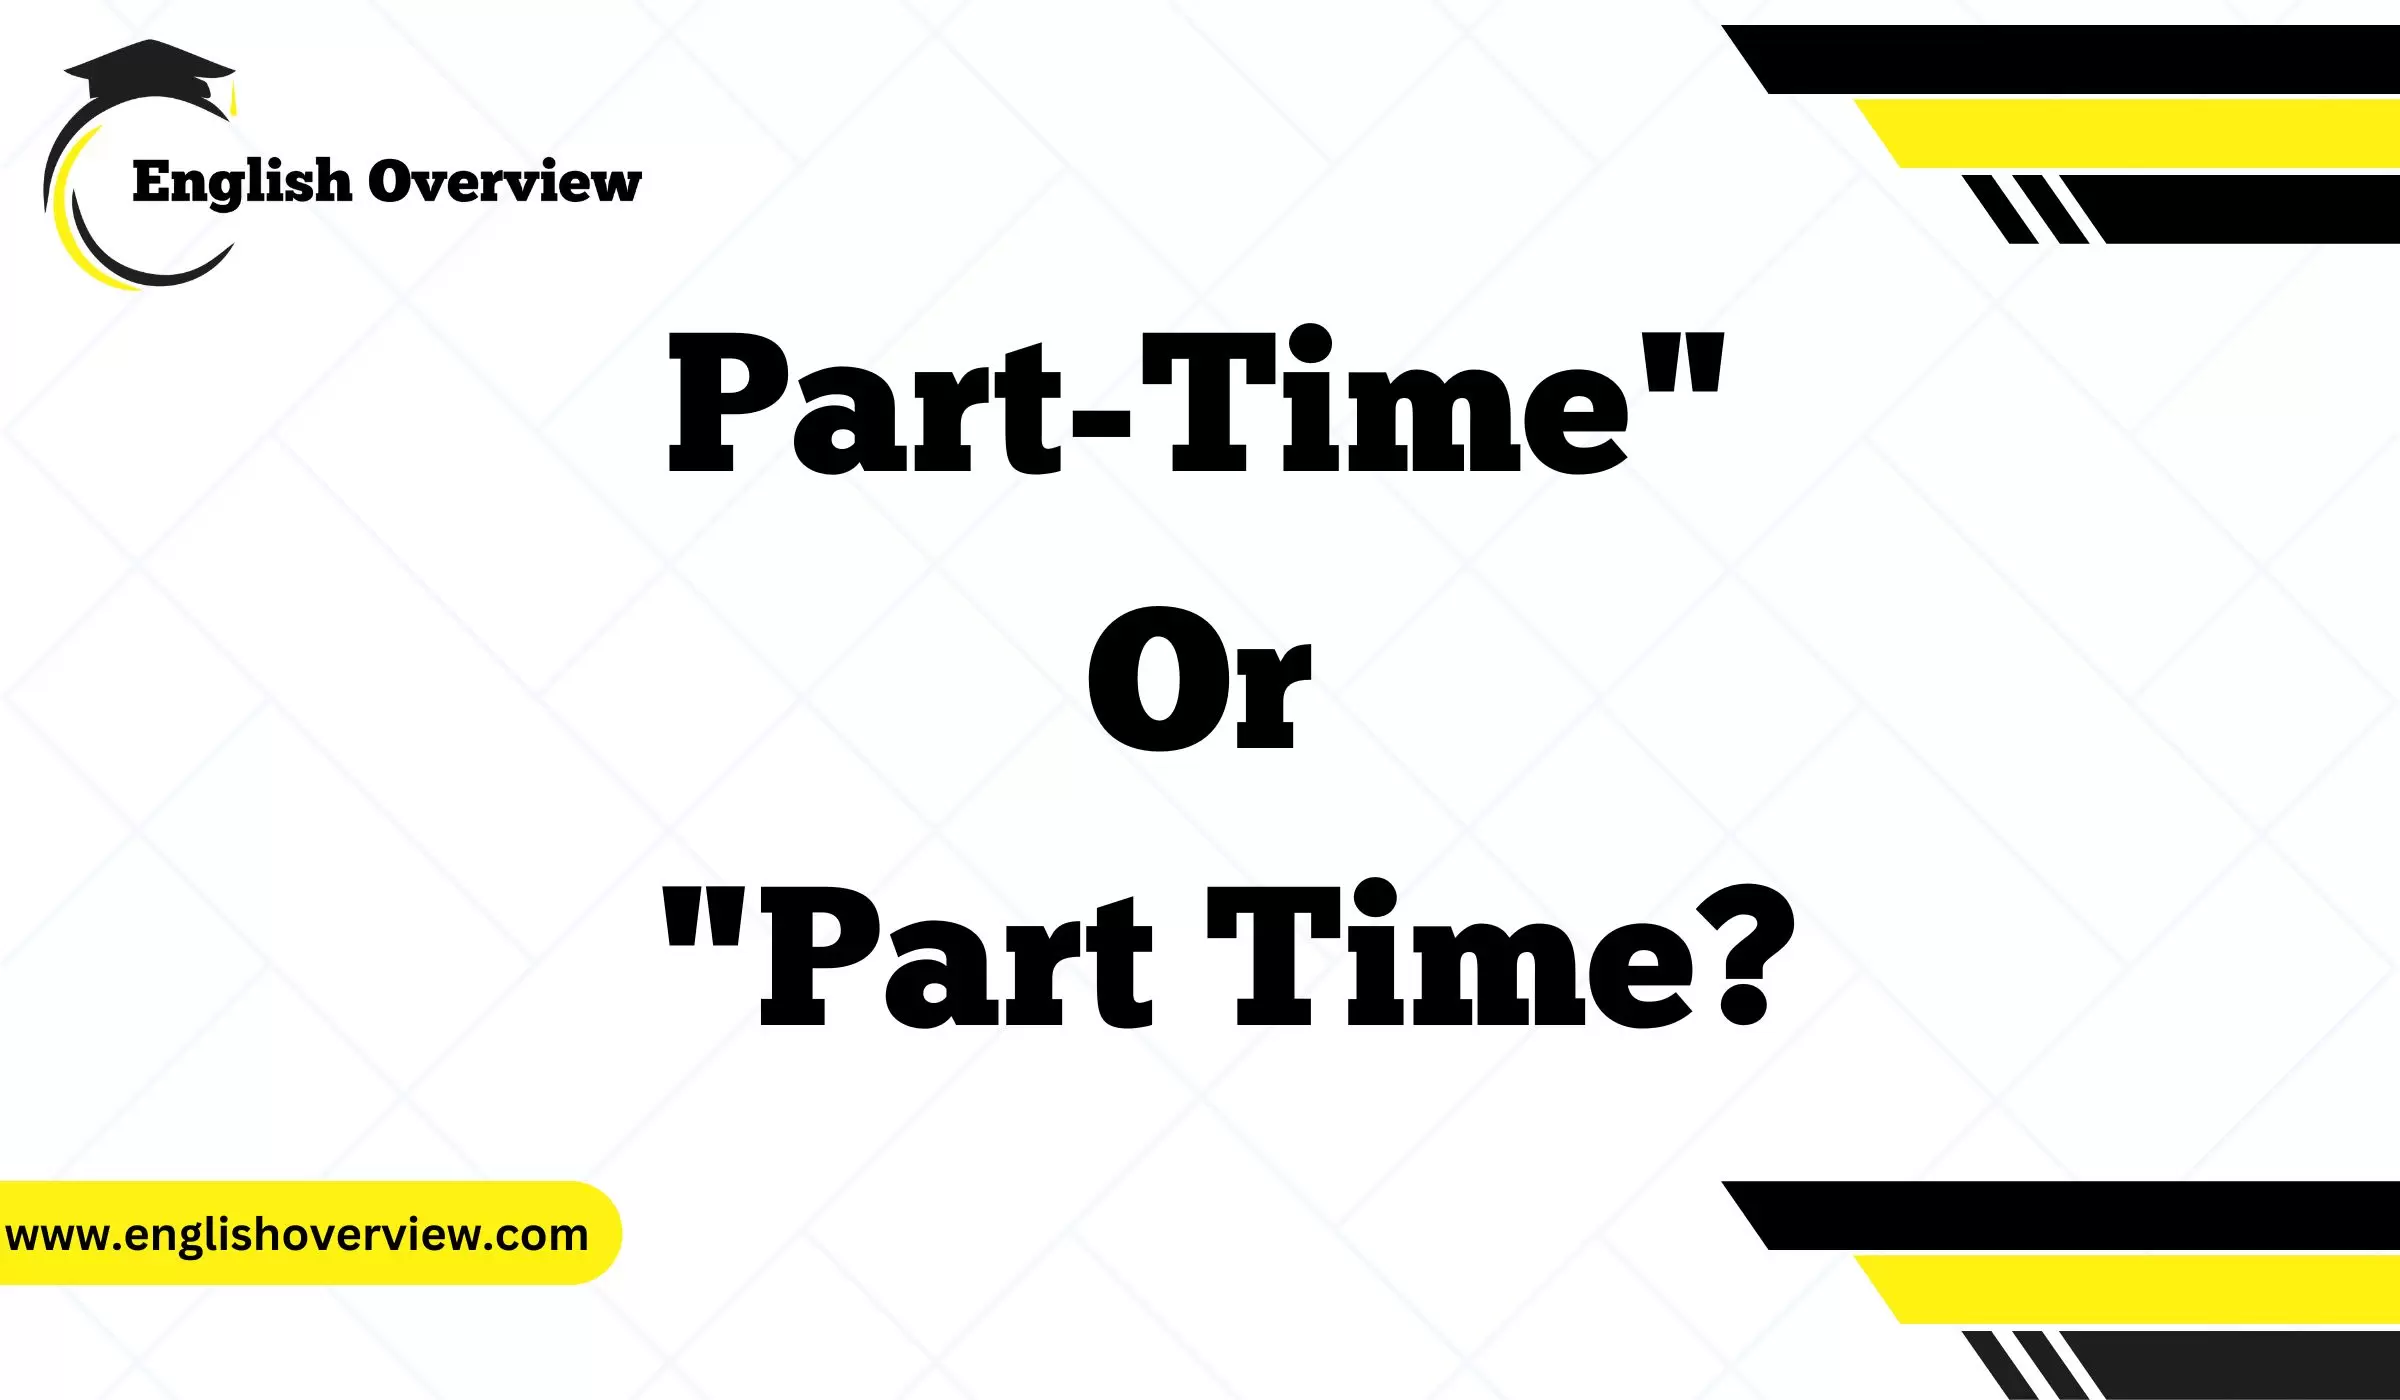 Part-Time" or "Part Time